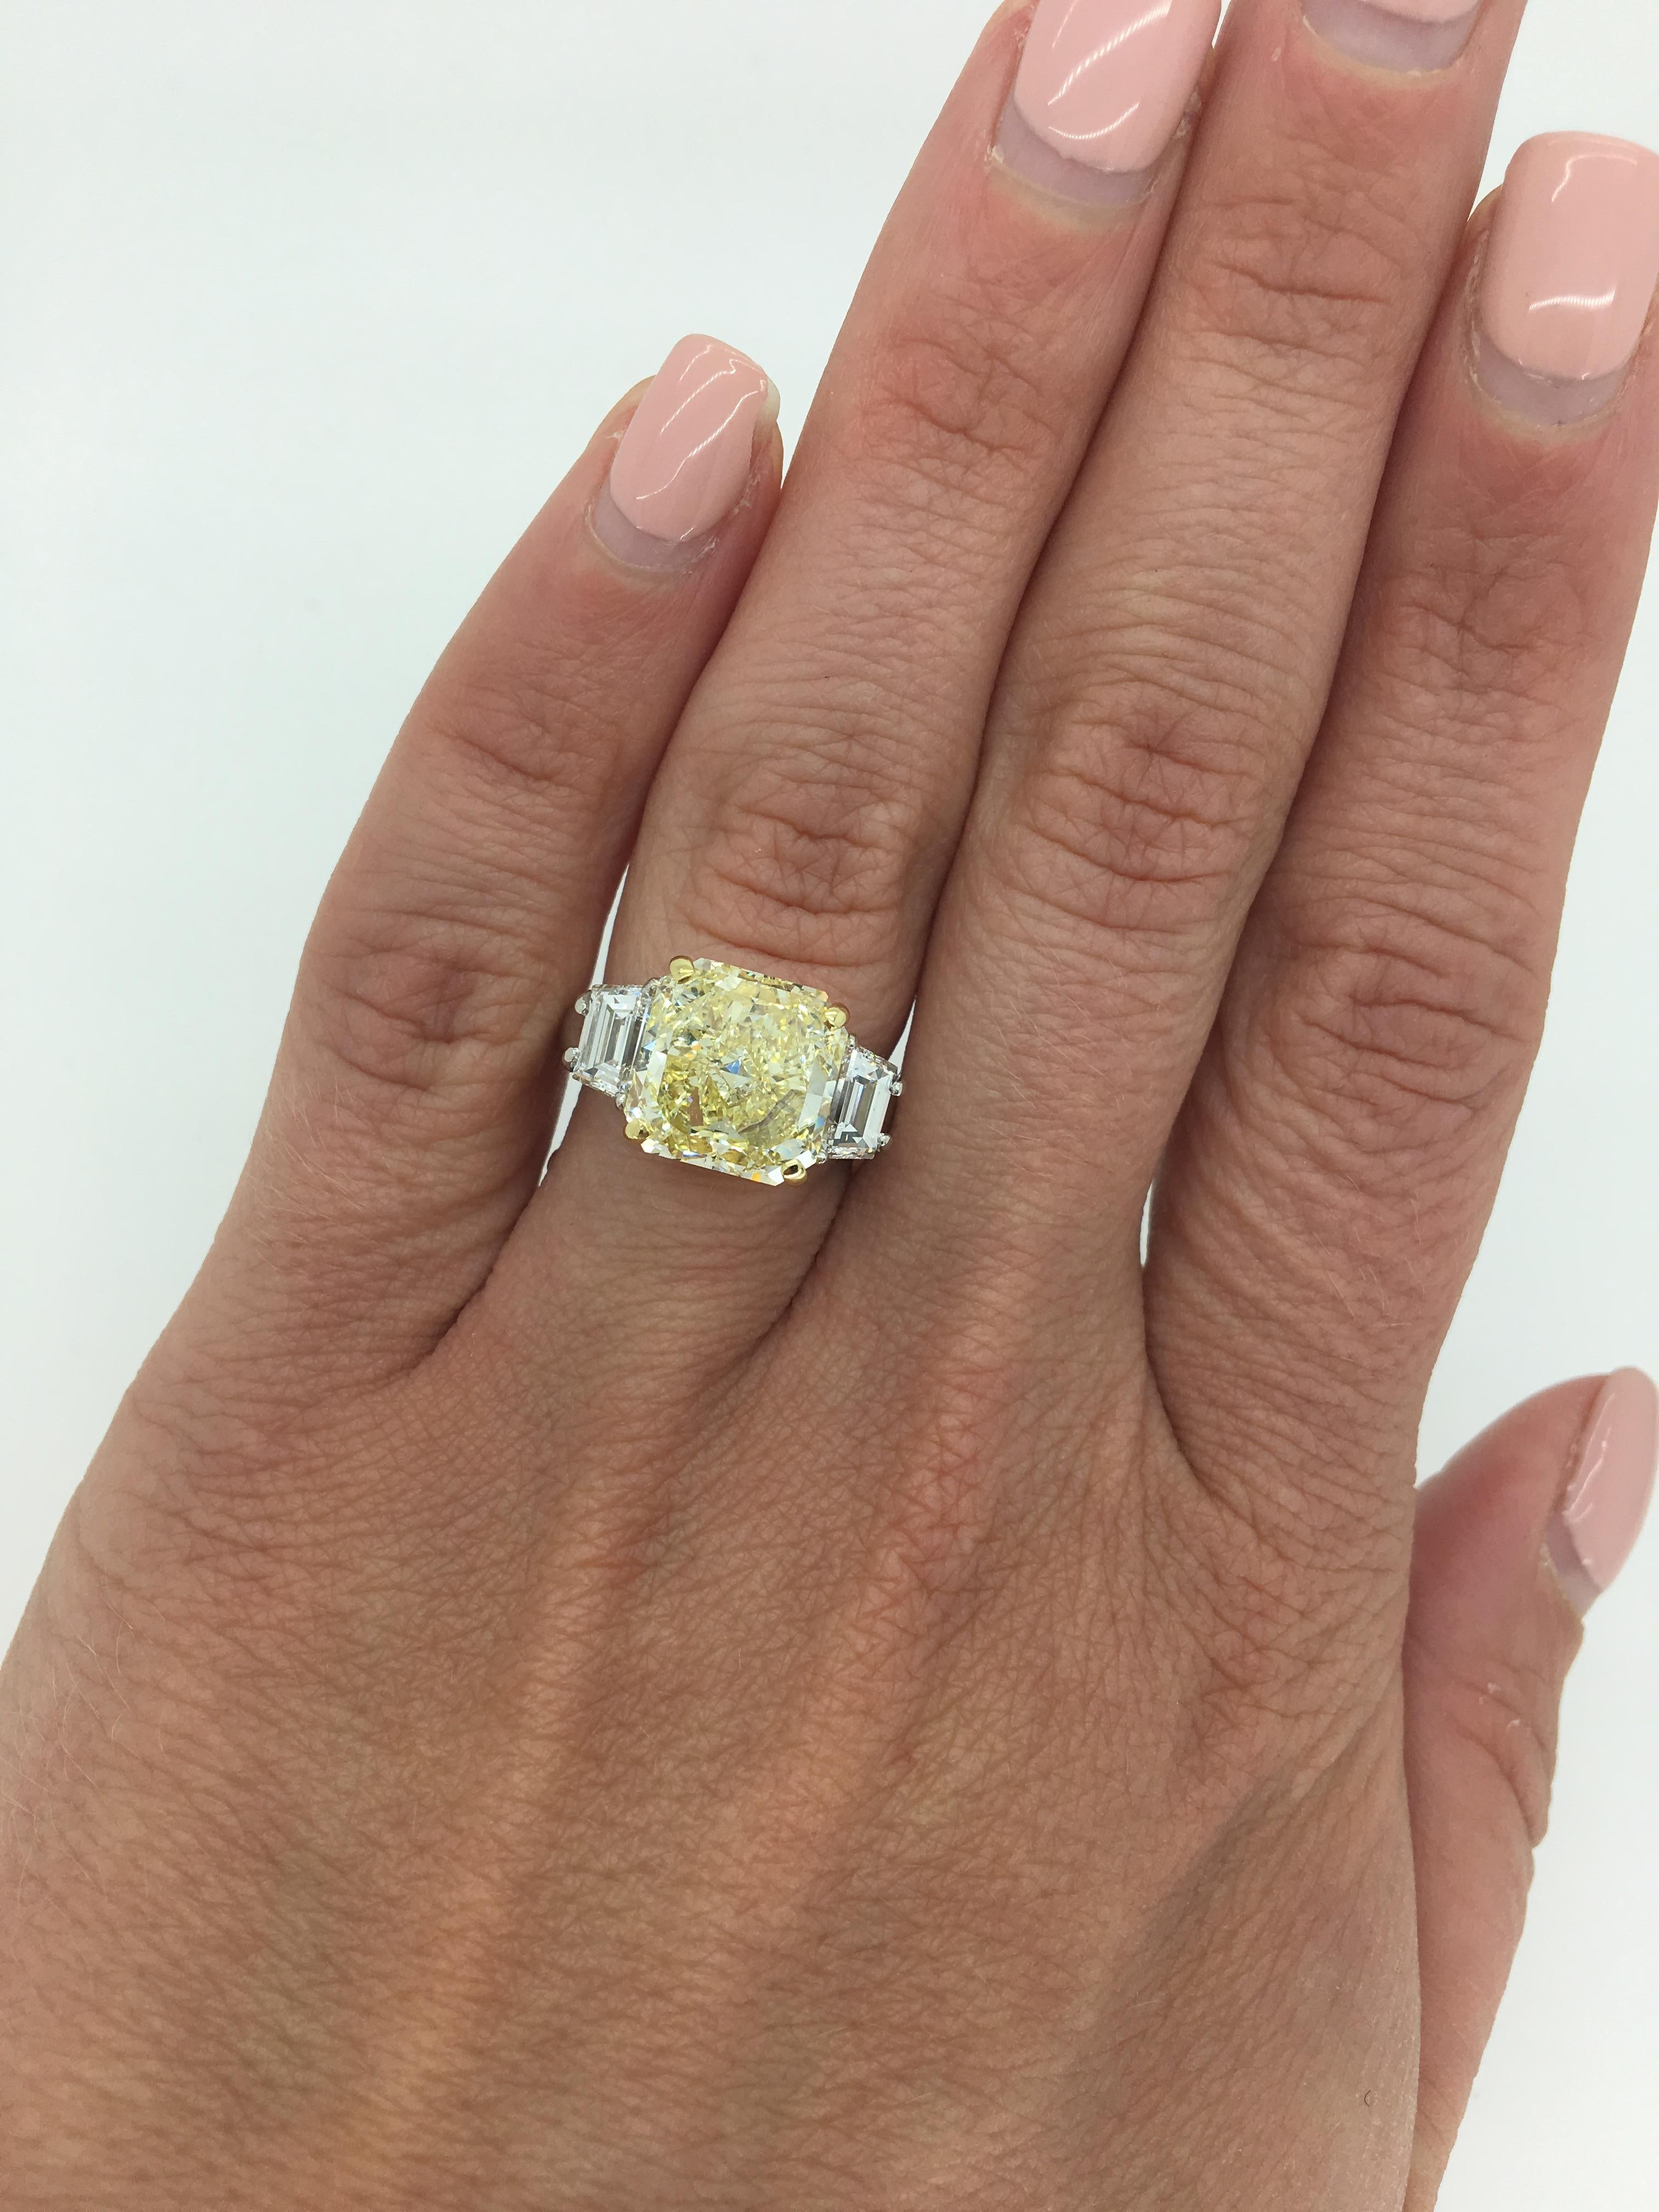 This beautiful ring features a GIA Certified 5.16CT Fancy Yellow Diamond, accented by two stunning Trapezoid Cut Diamonds.

GIA #11314484
Center Diamond Carat Weight: 5.16CT
Center Diamond Cut: Cut Cornered Square Modified Brilliant
Color: Fancy